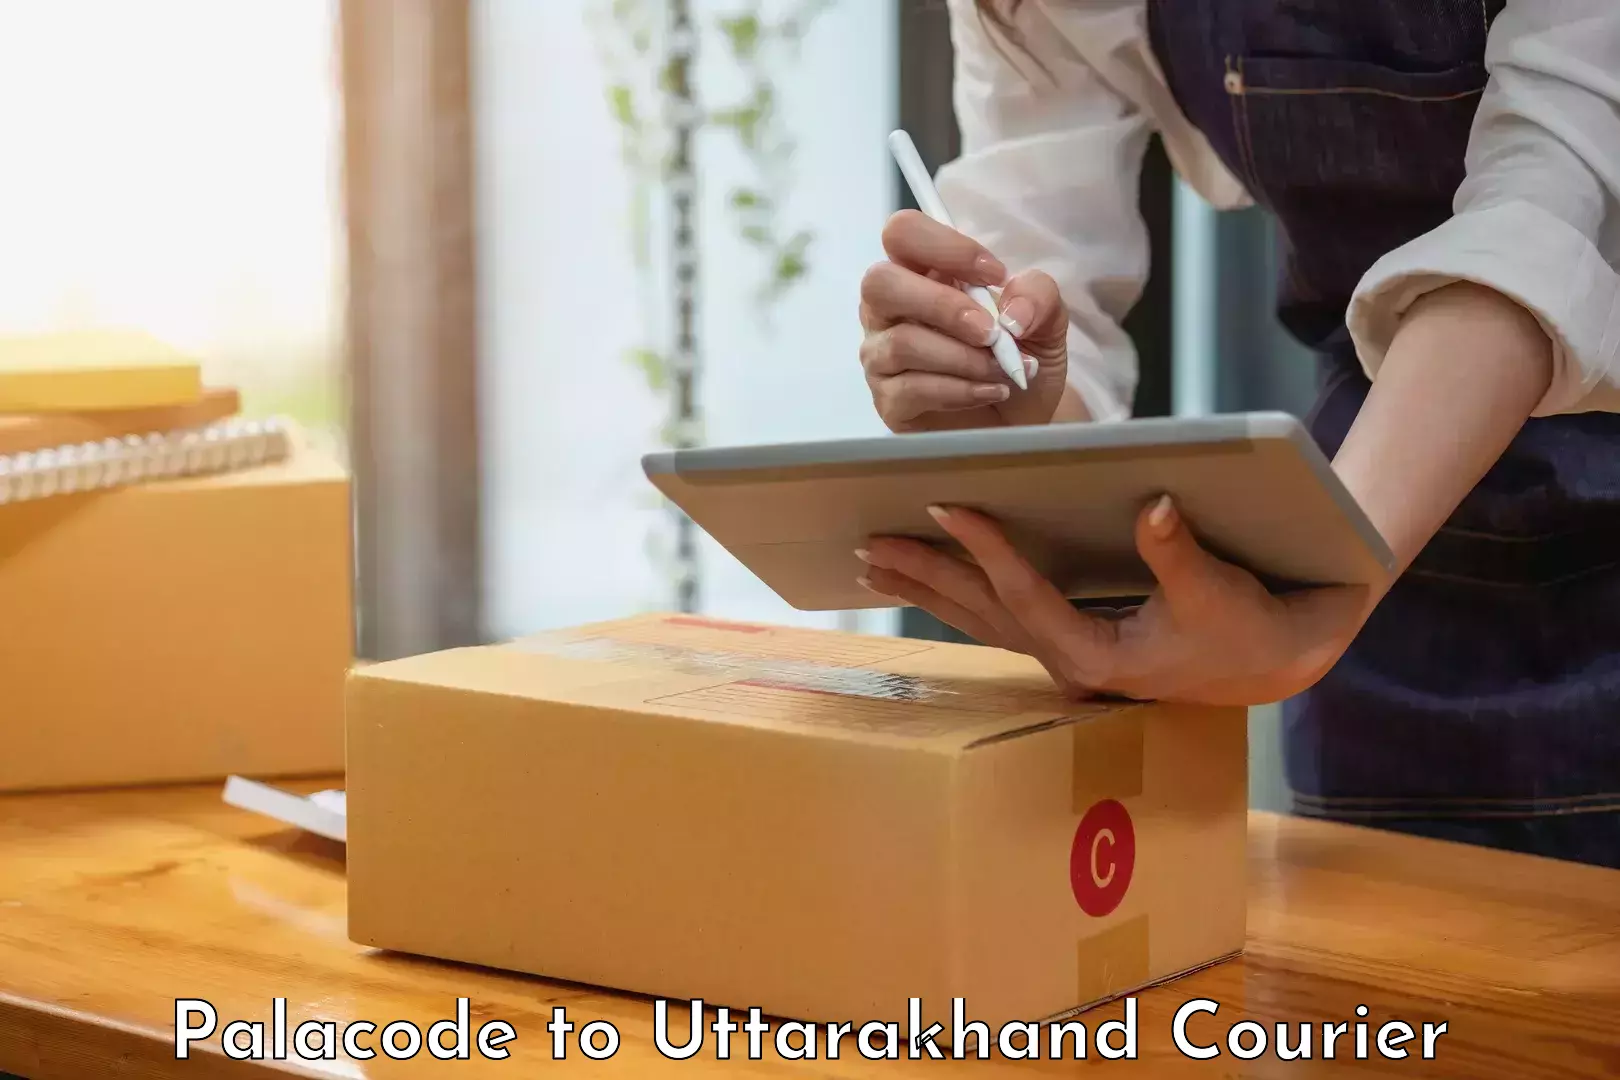 Online package tracking in Palacode to Uttarakhand